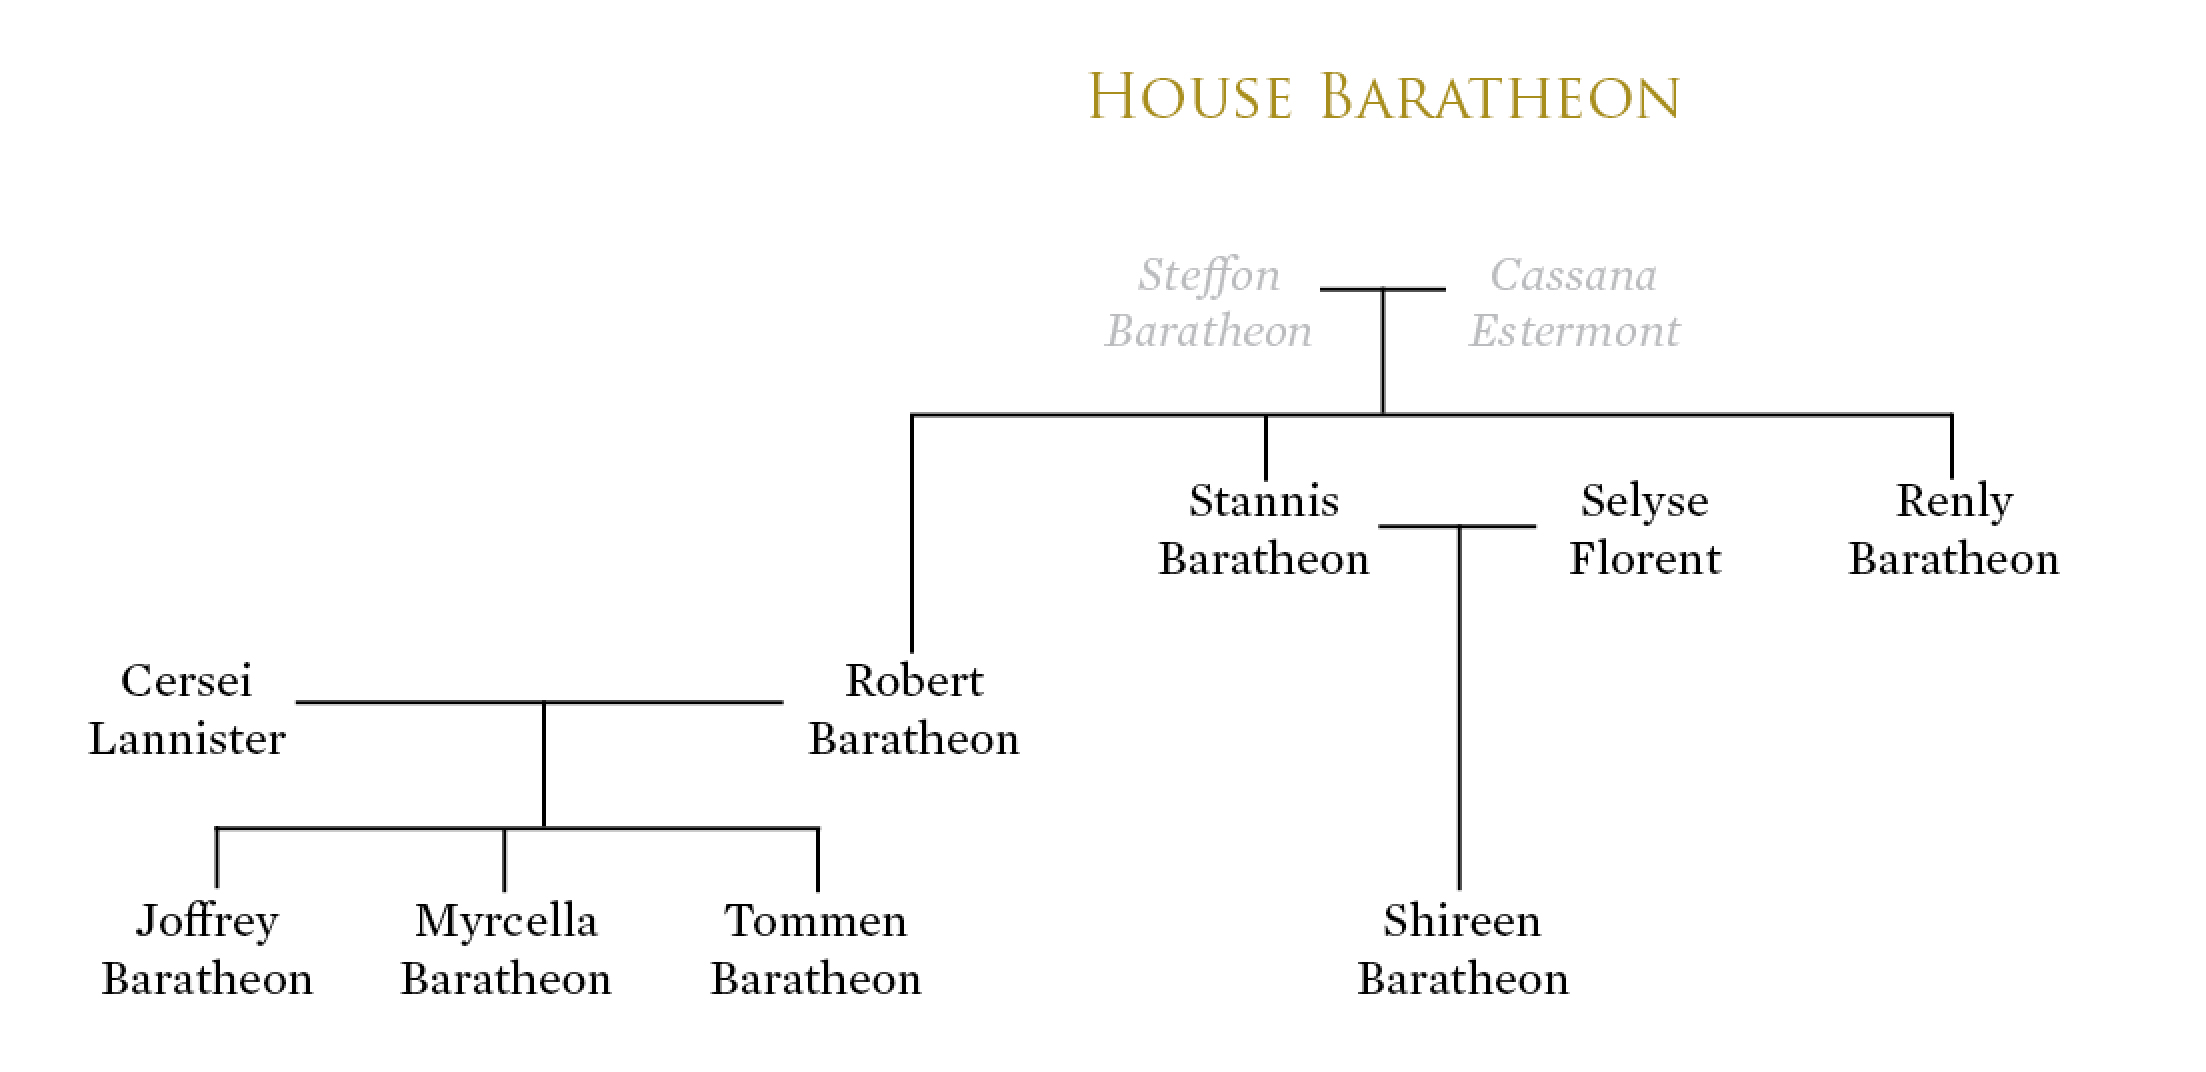 game of thrones character list no spoilers